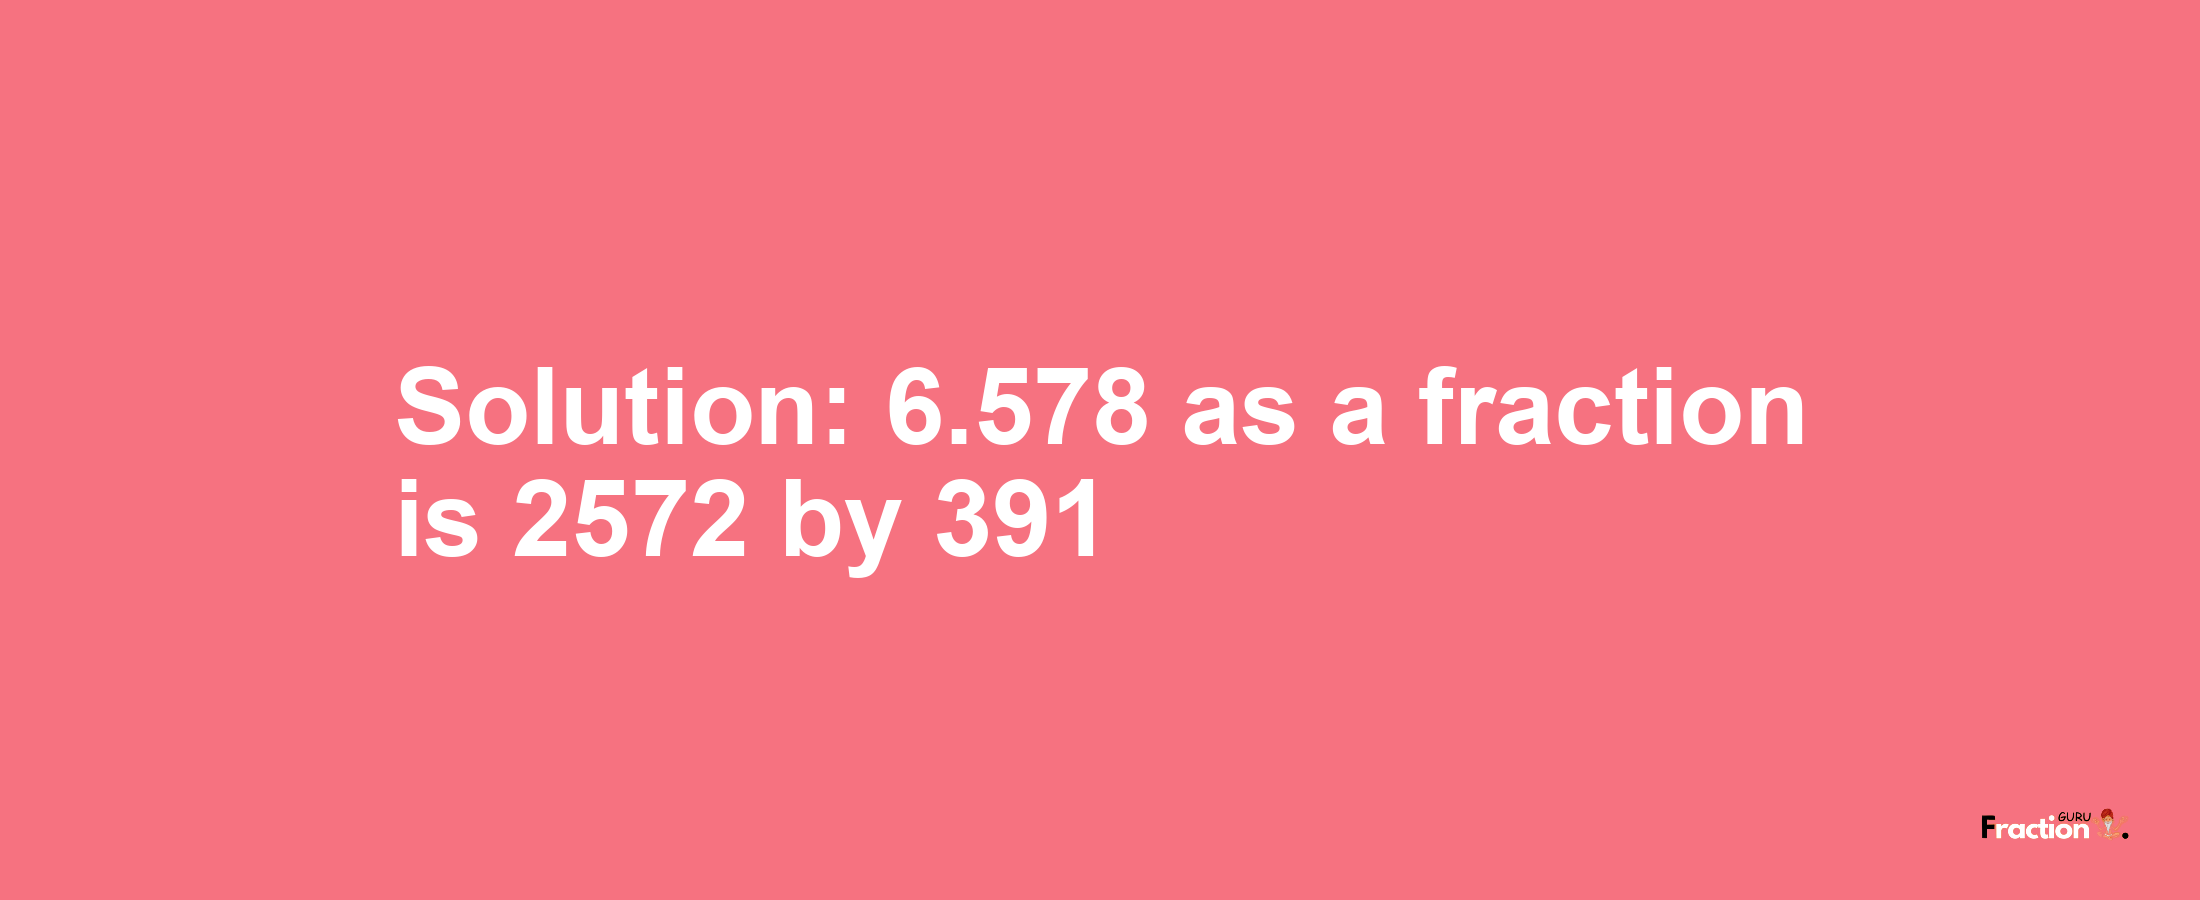 Solution:6.578 as a fraction is 2572/391